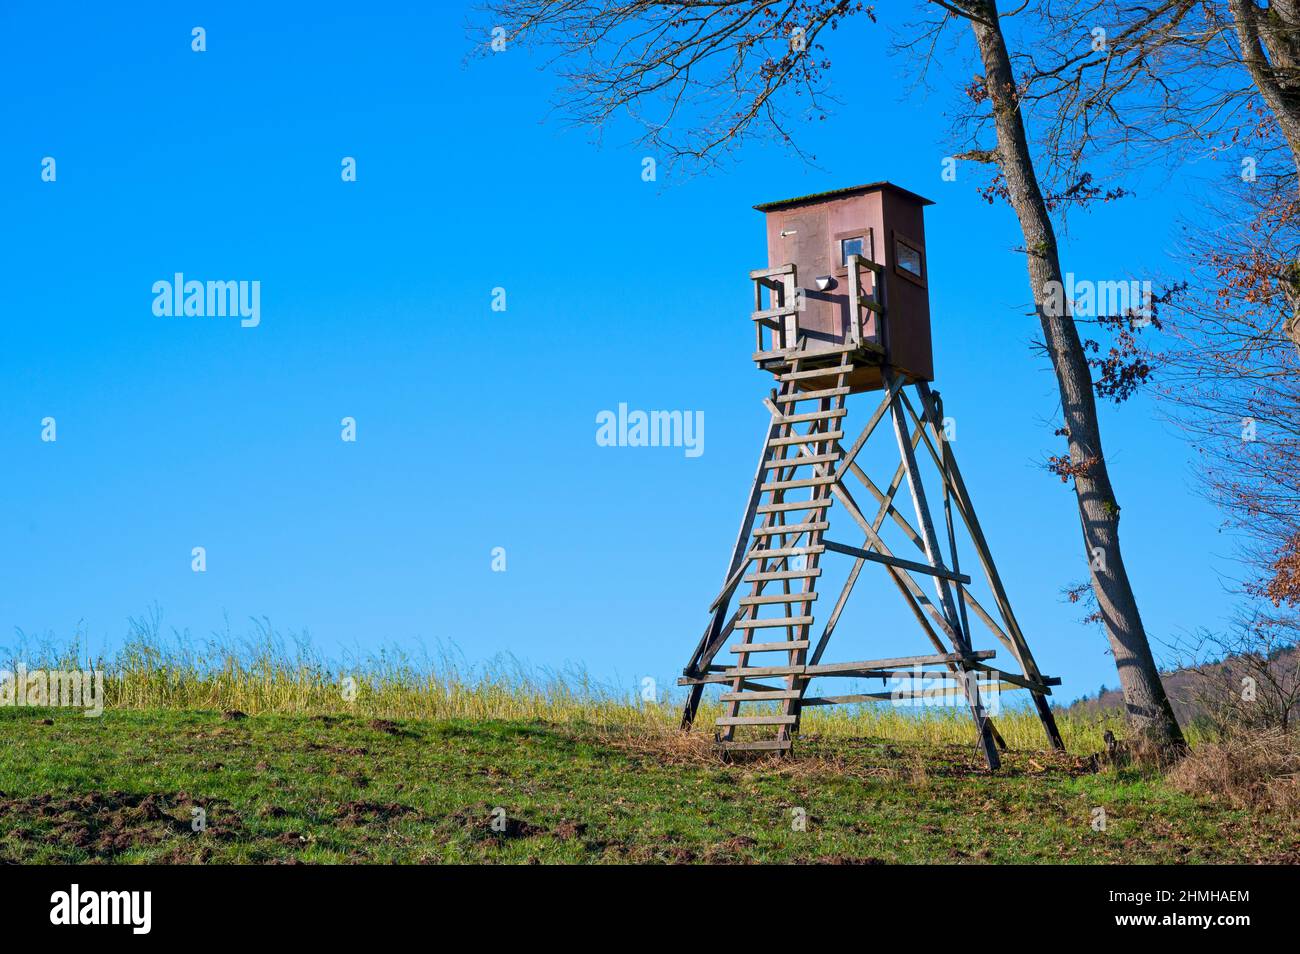 High seat at the edge of the forest, Spessart, December, Hesse, Germany, Europe Stock Photo